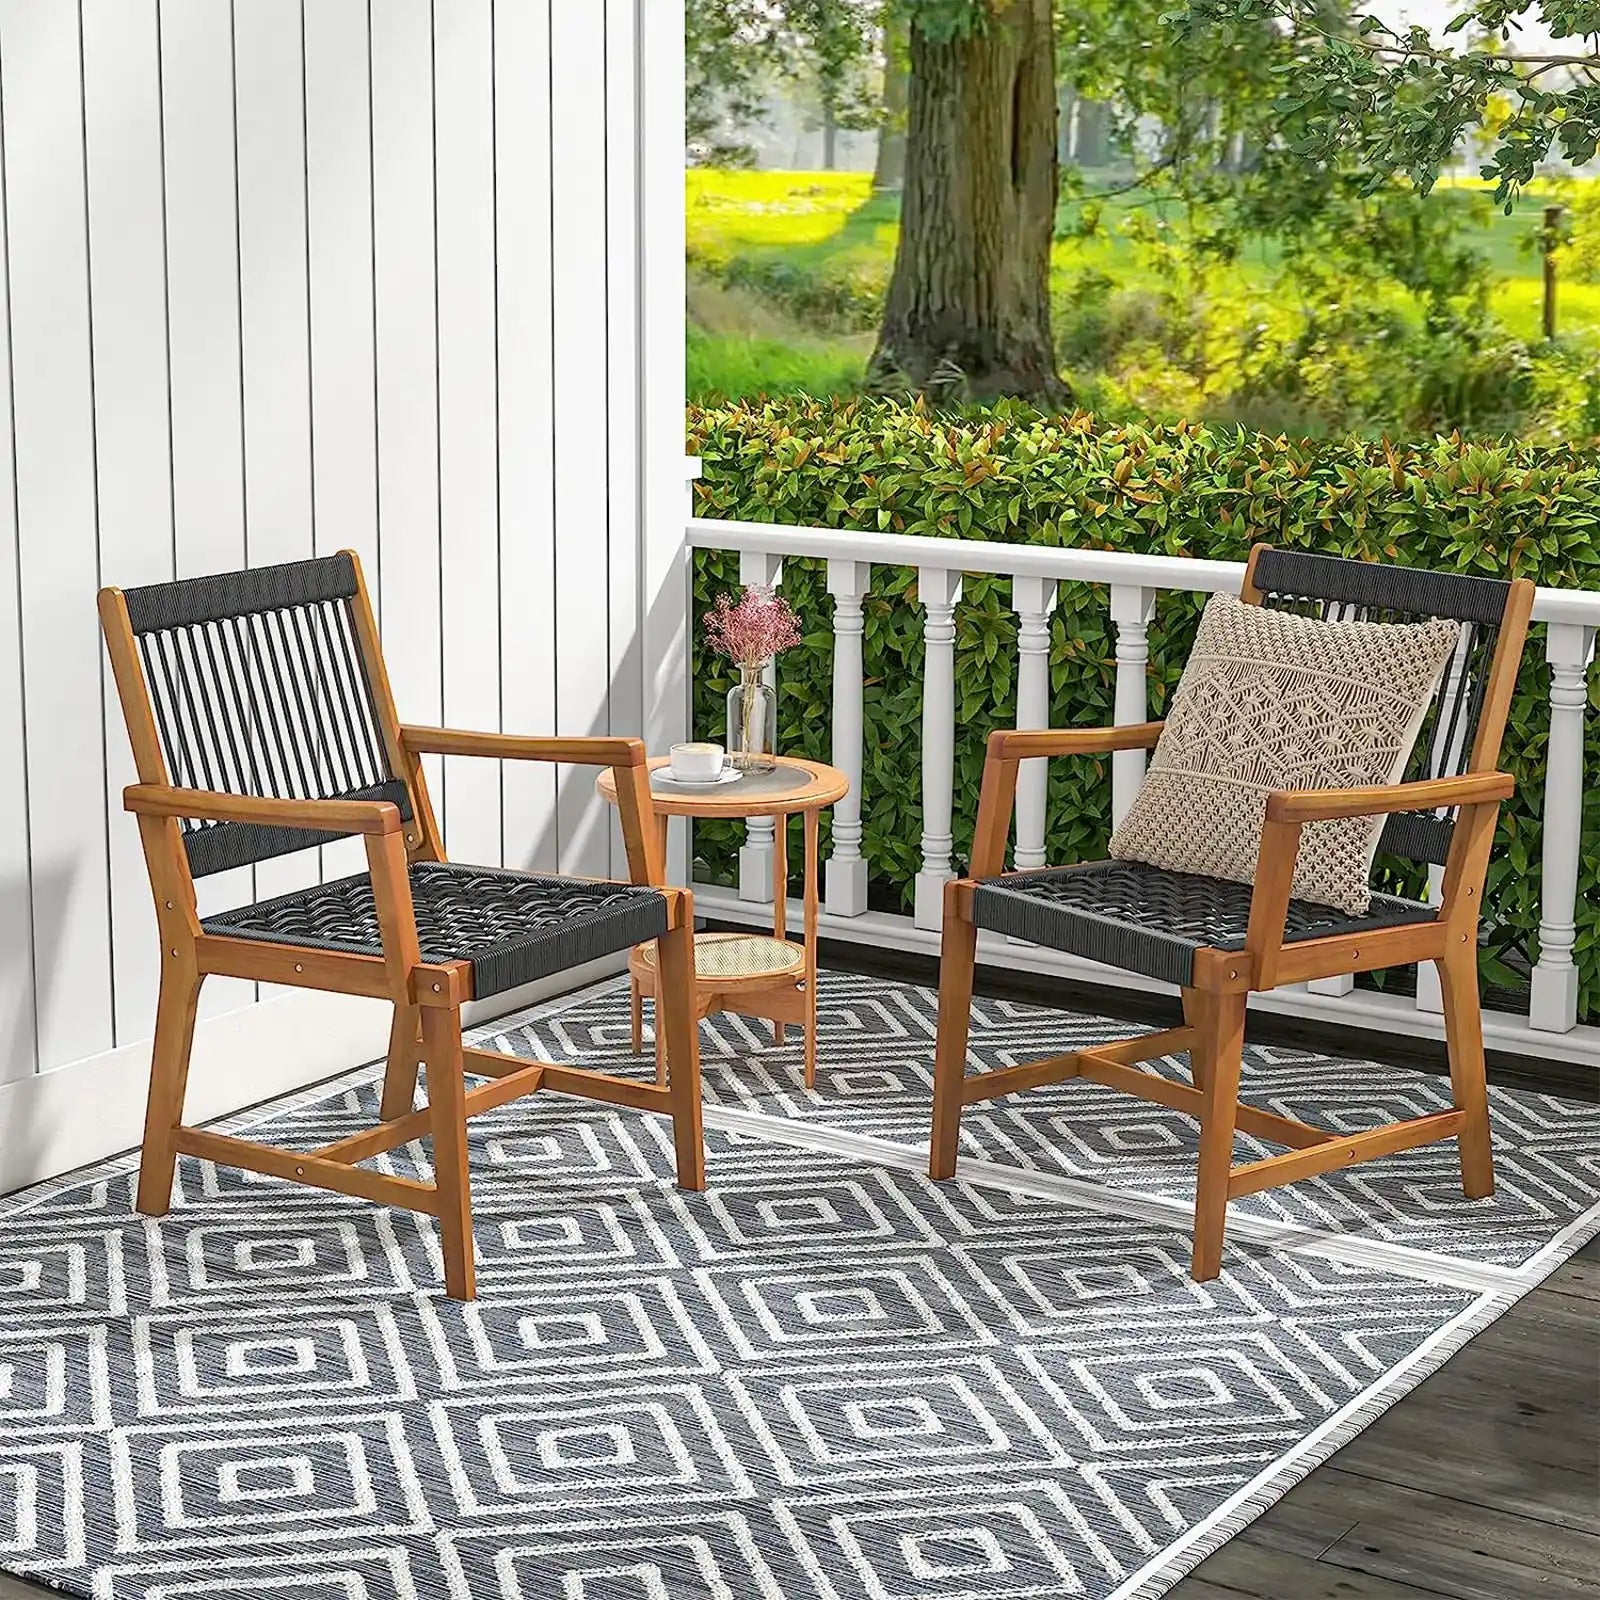 Outdoor Acacia Wood Dining Chairs Set of 4, All-Weather Rope Woven Patio Chairs with Armrests, Outdoor Armchairs for Patio, Lawn, Garden, Backyard